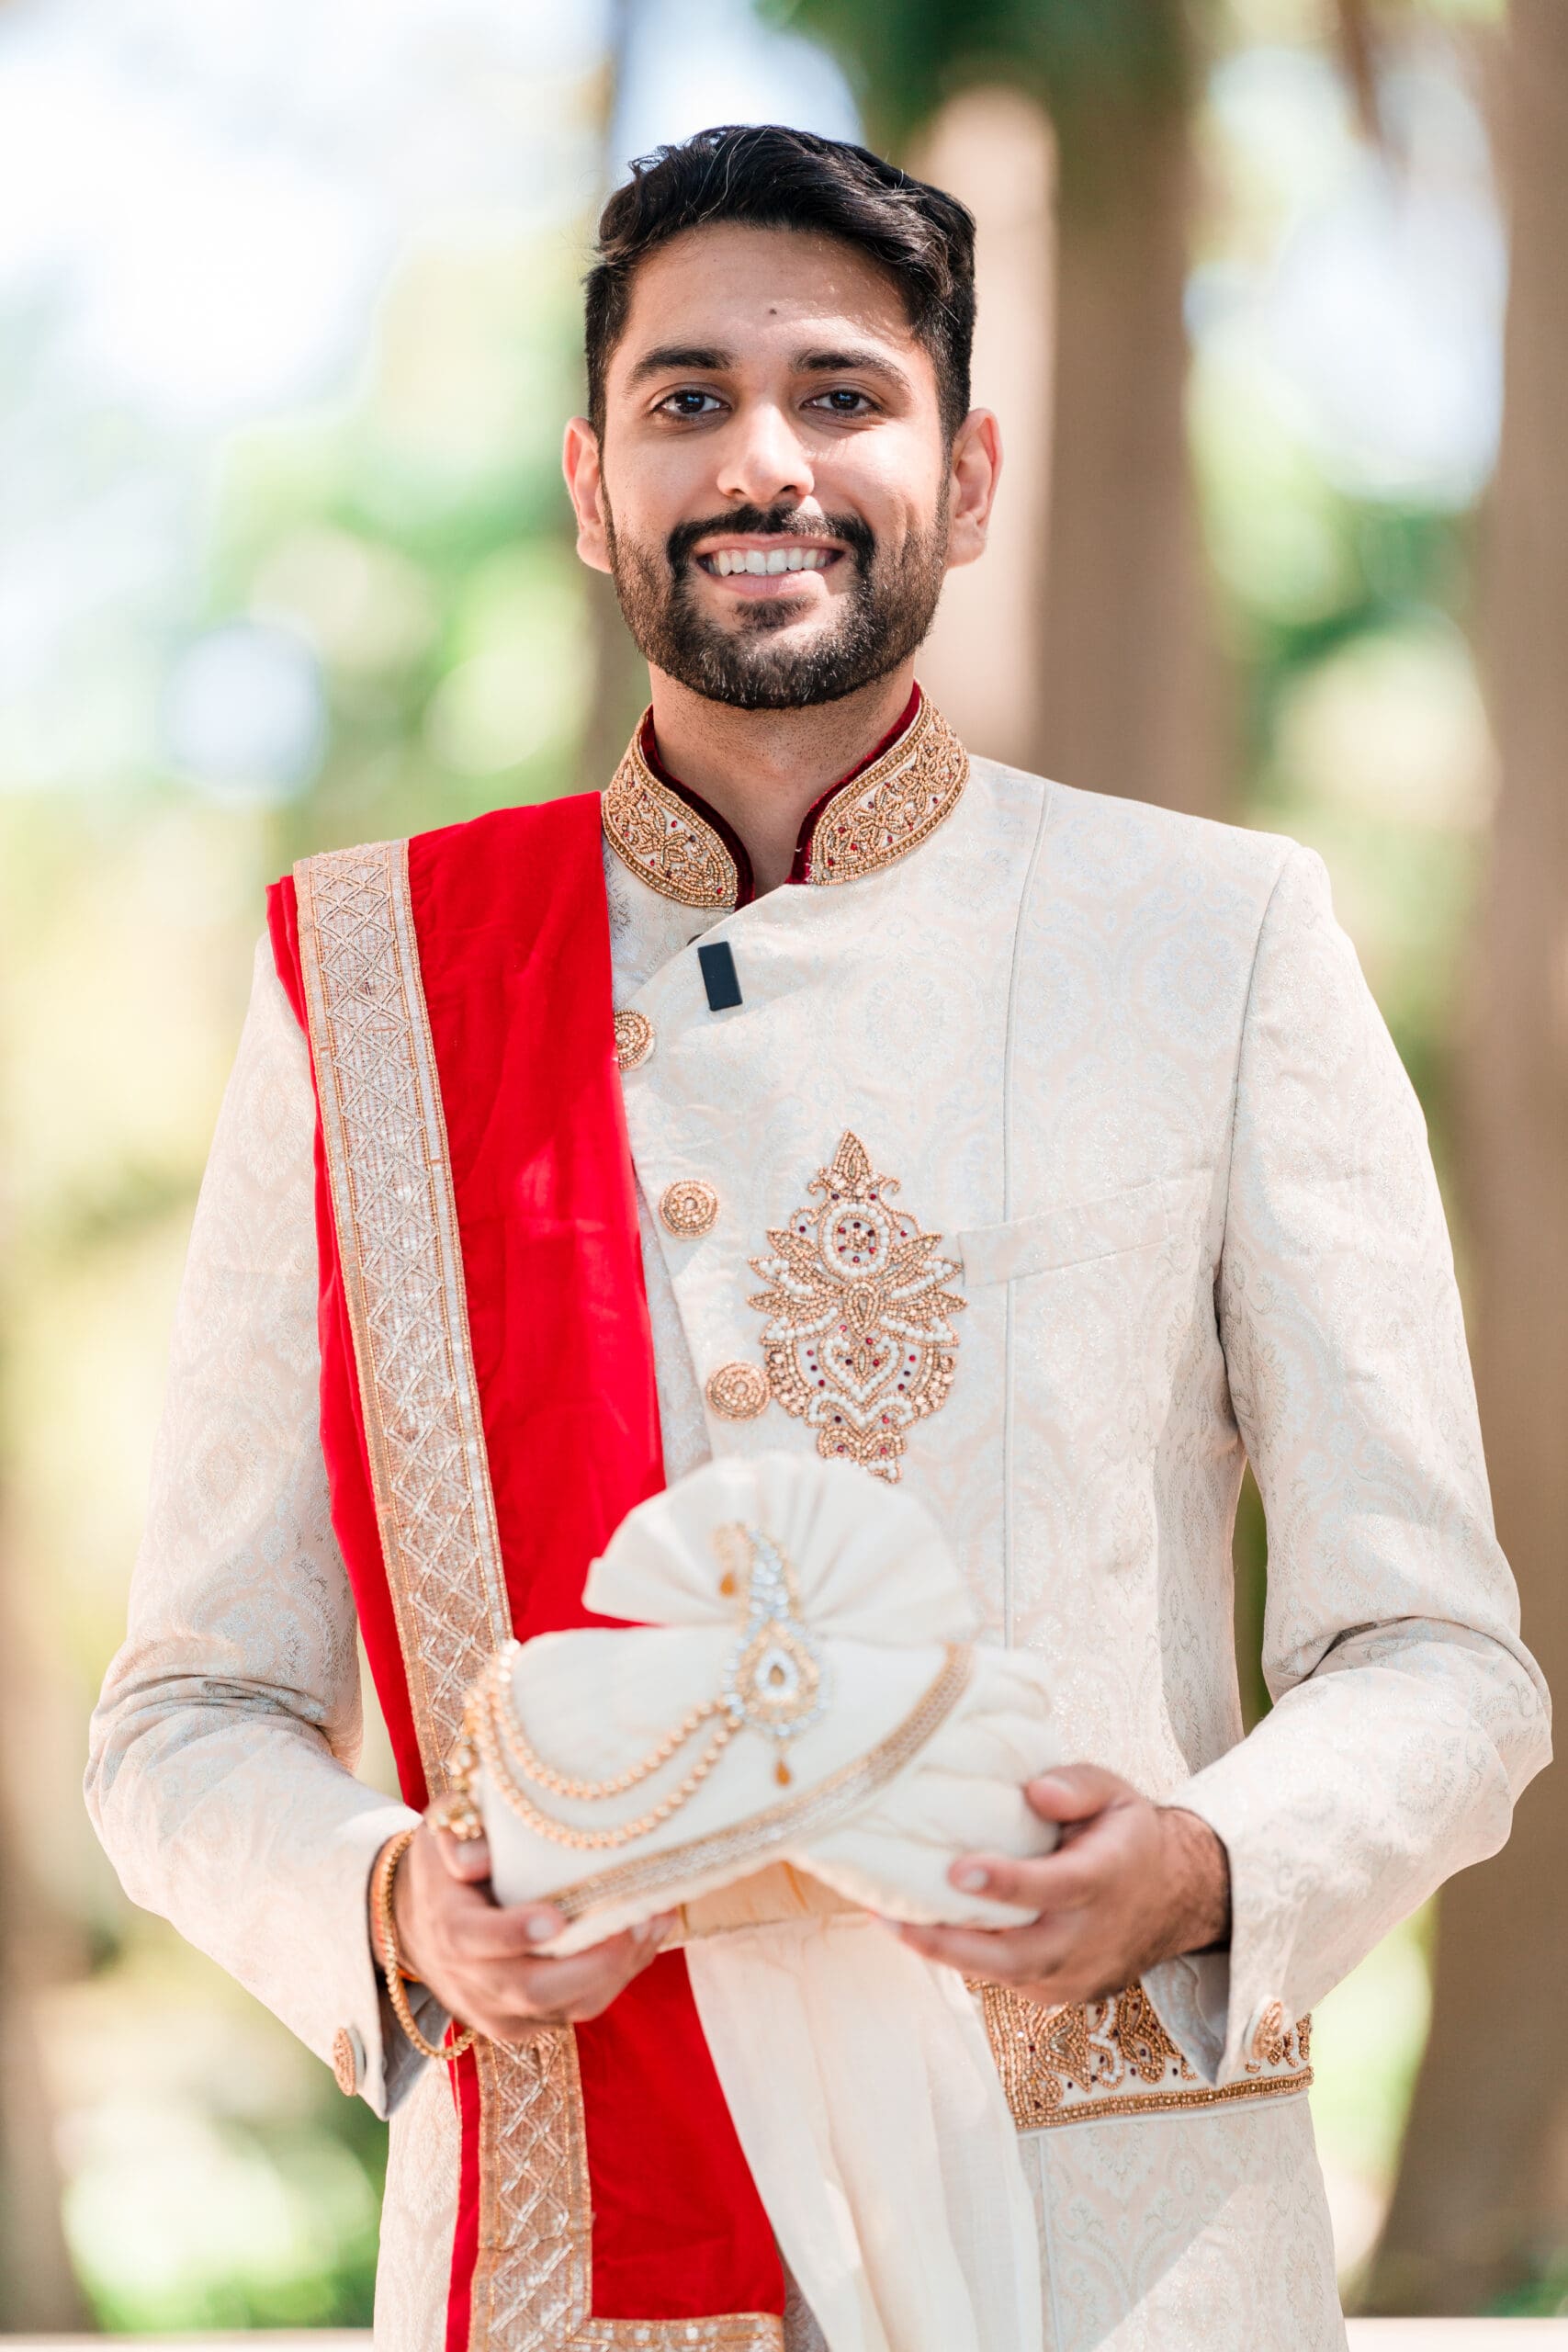 Rahul smiling while holding his traditional Indian wedding headpiece